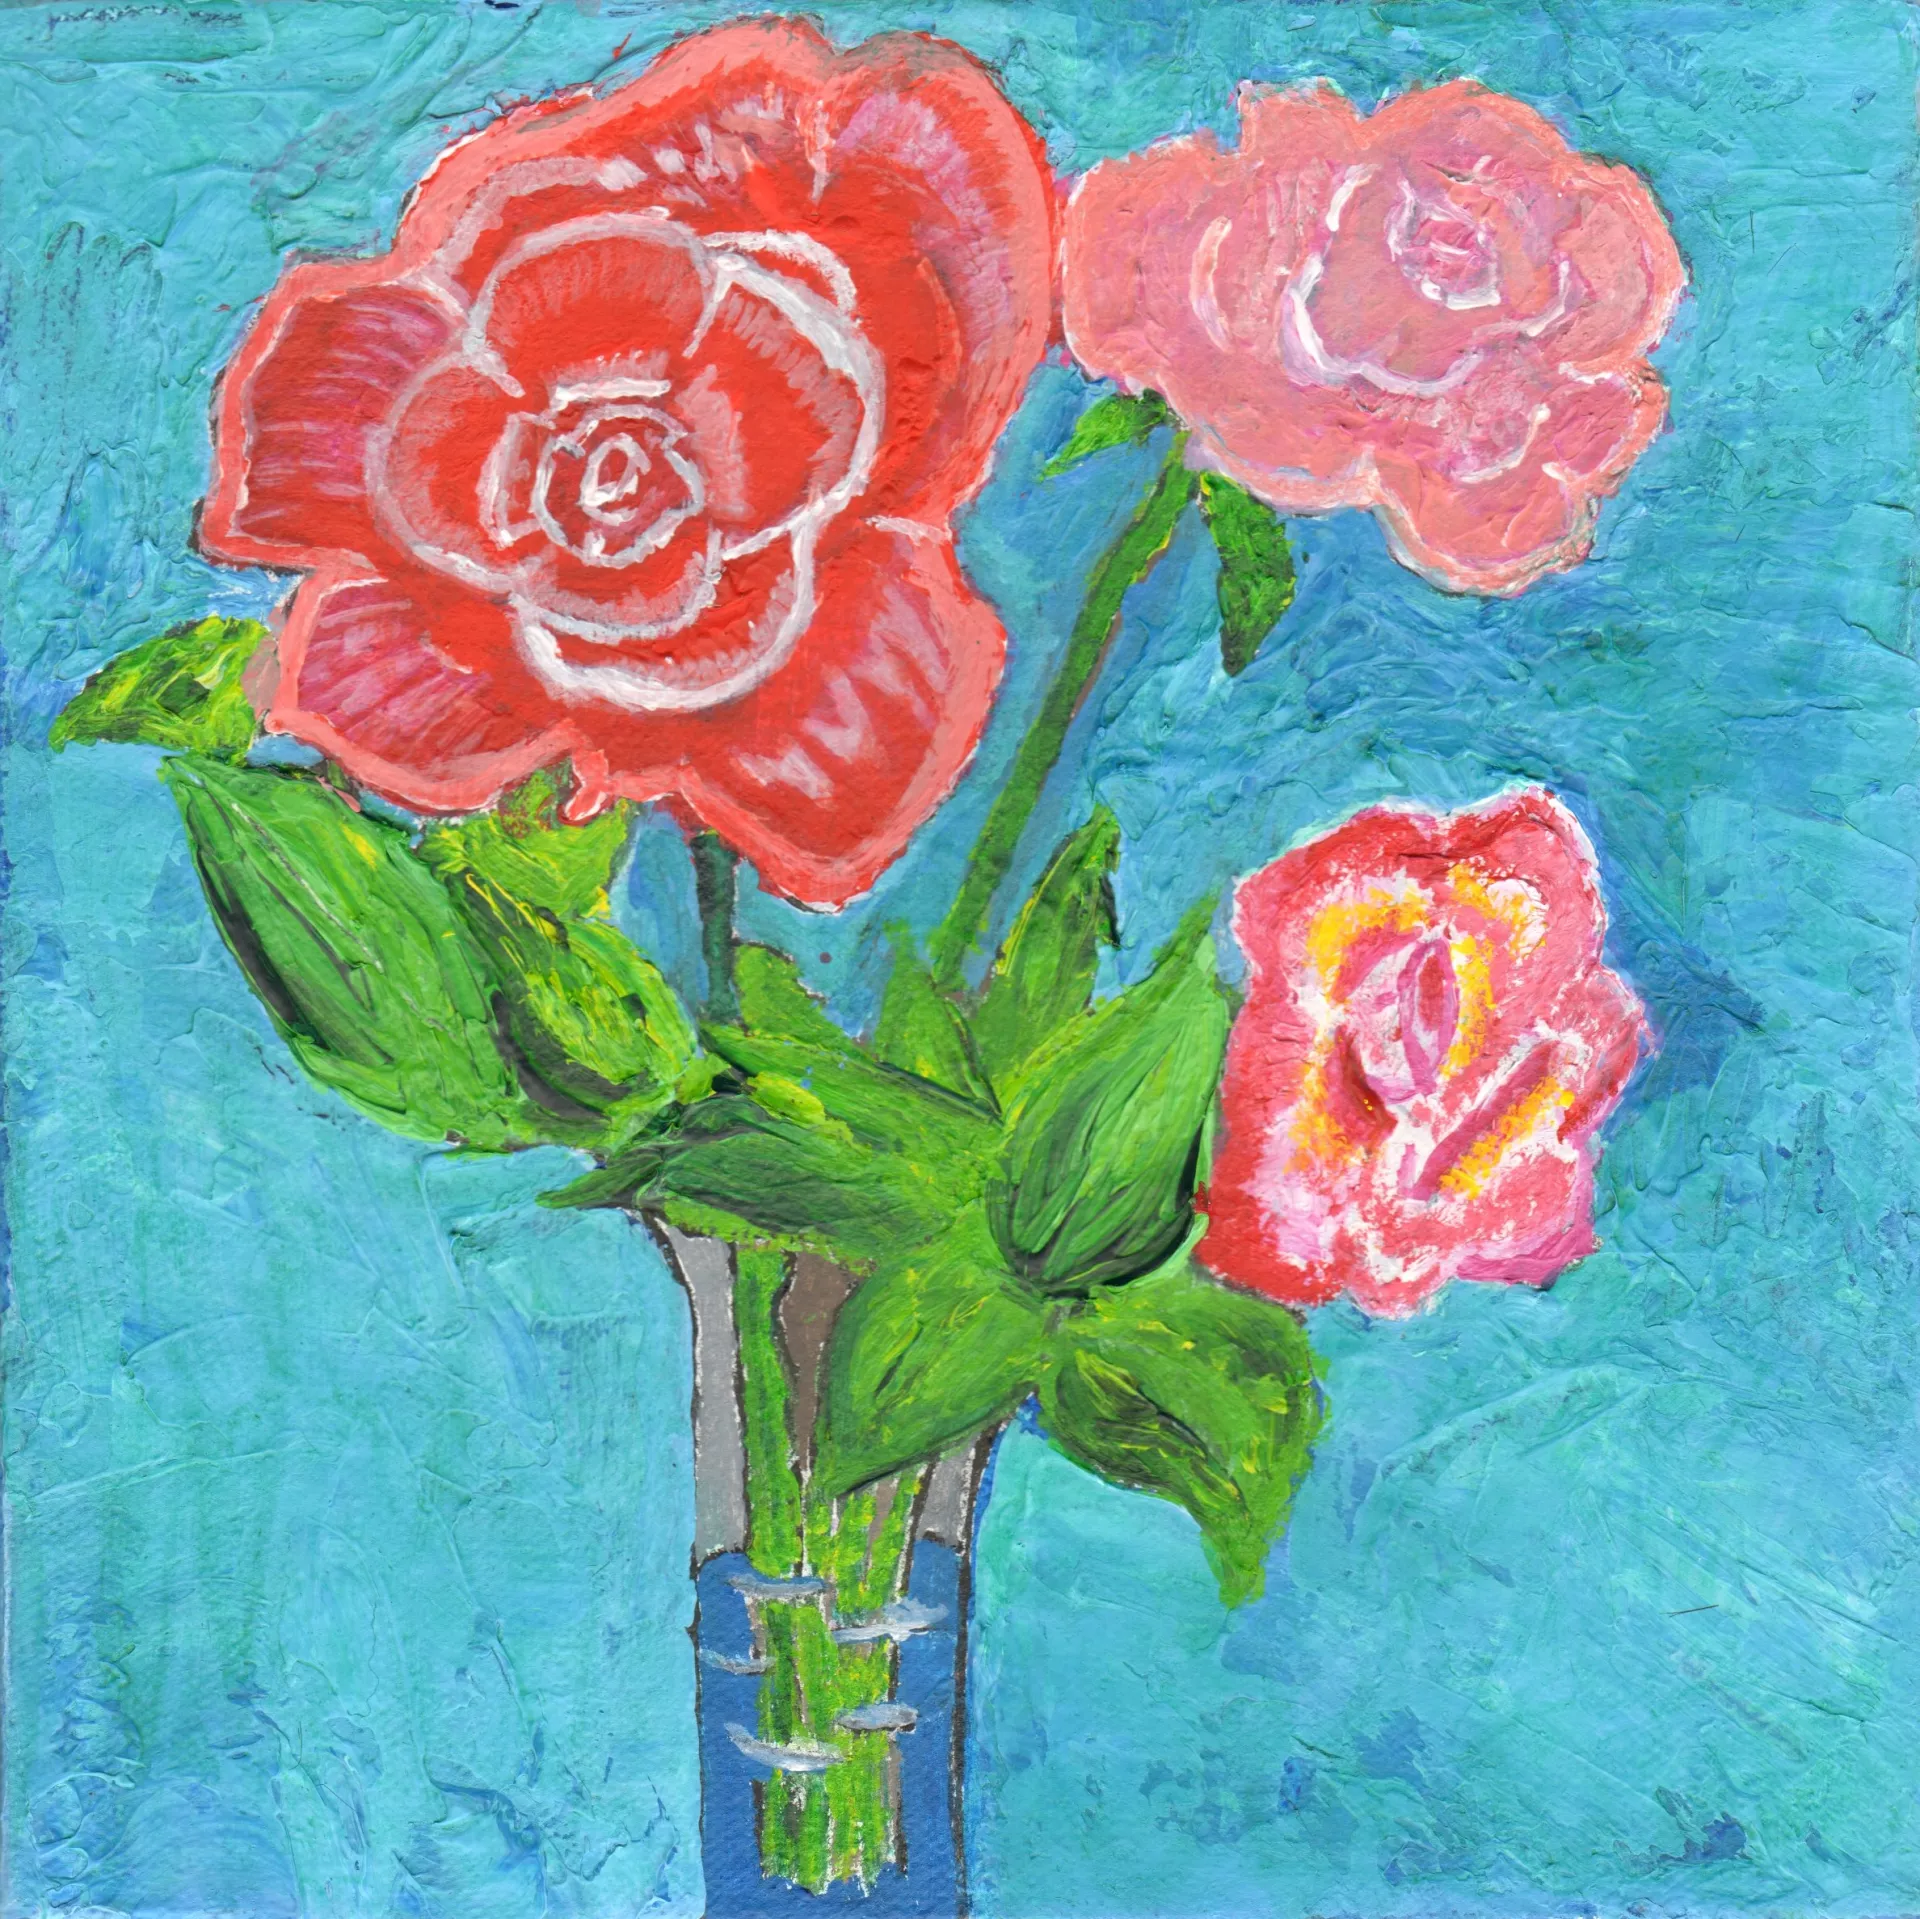 Kris Lee Three of a Kind, 2022 Three pink roses in a vase against a blue background.  Acrylic on canvas, 8" x 8"